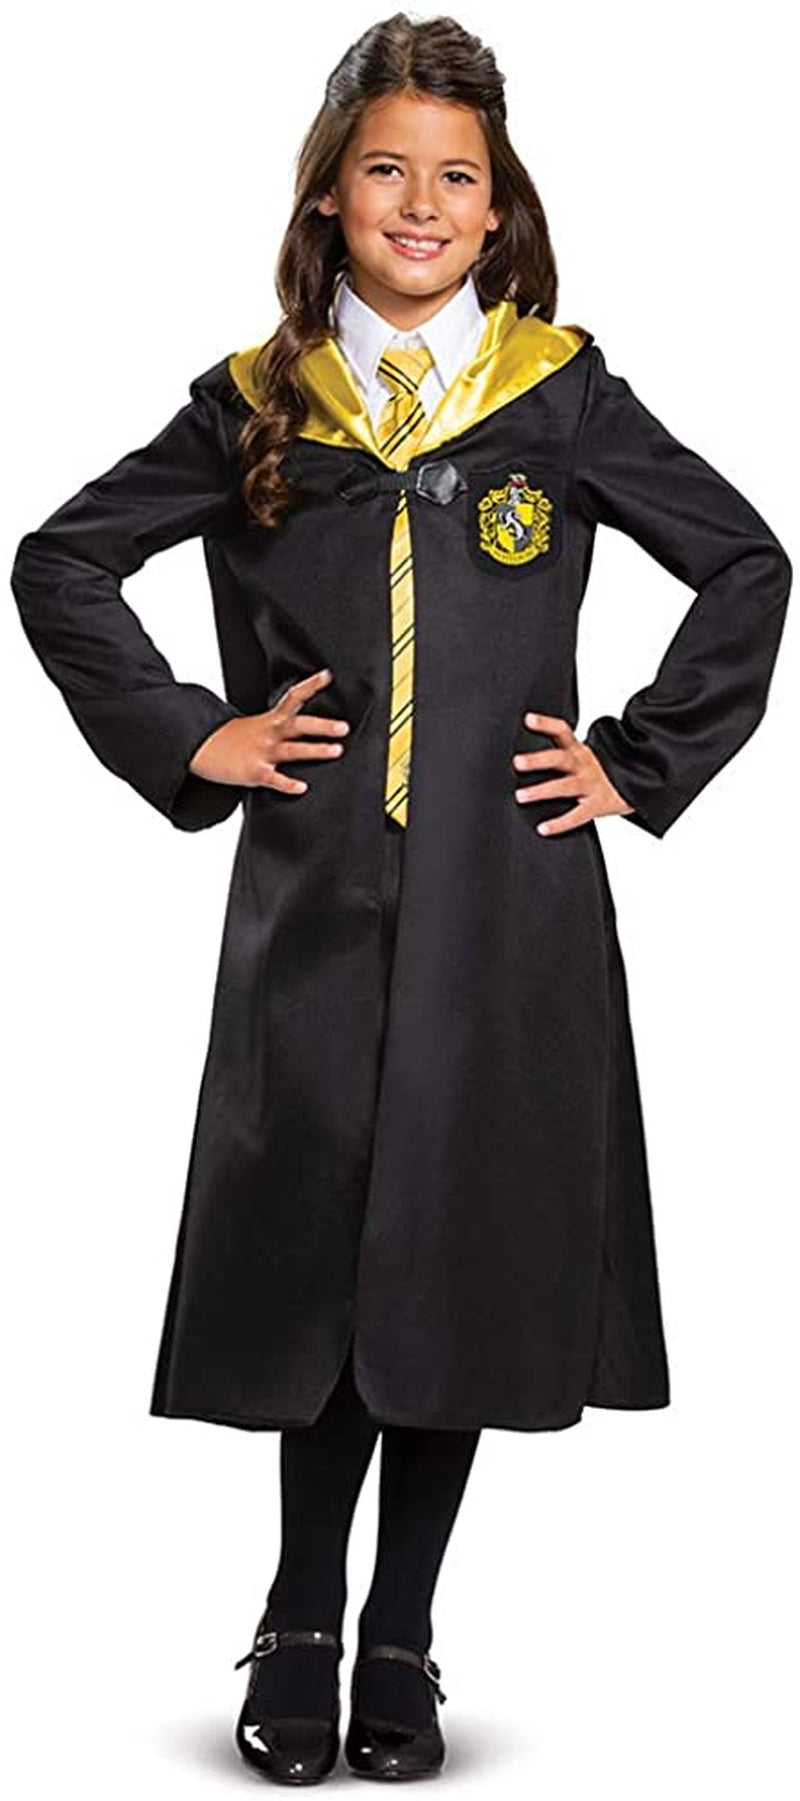 Harry Potter Robe, Official Hogwarts Wizarding World Costume Robes, Classic Kids Size Dress up Accessory  Disguise Hufflepuff Large (10-12) 